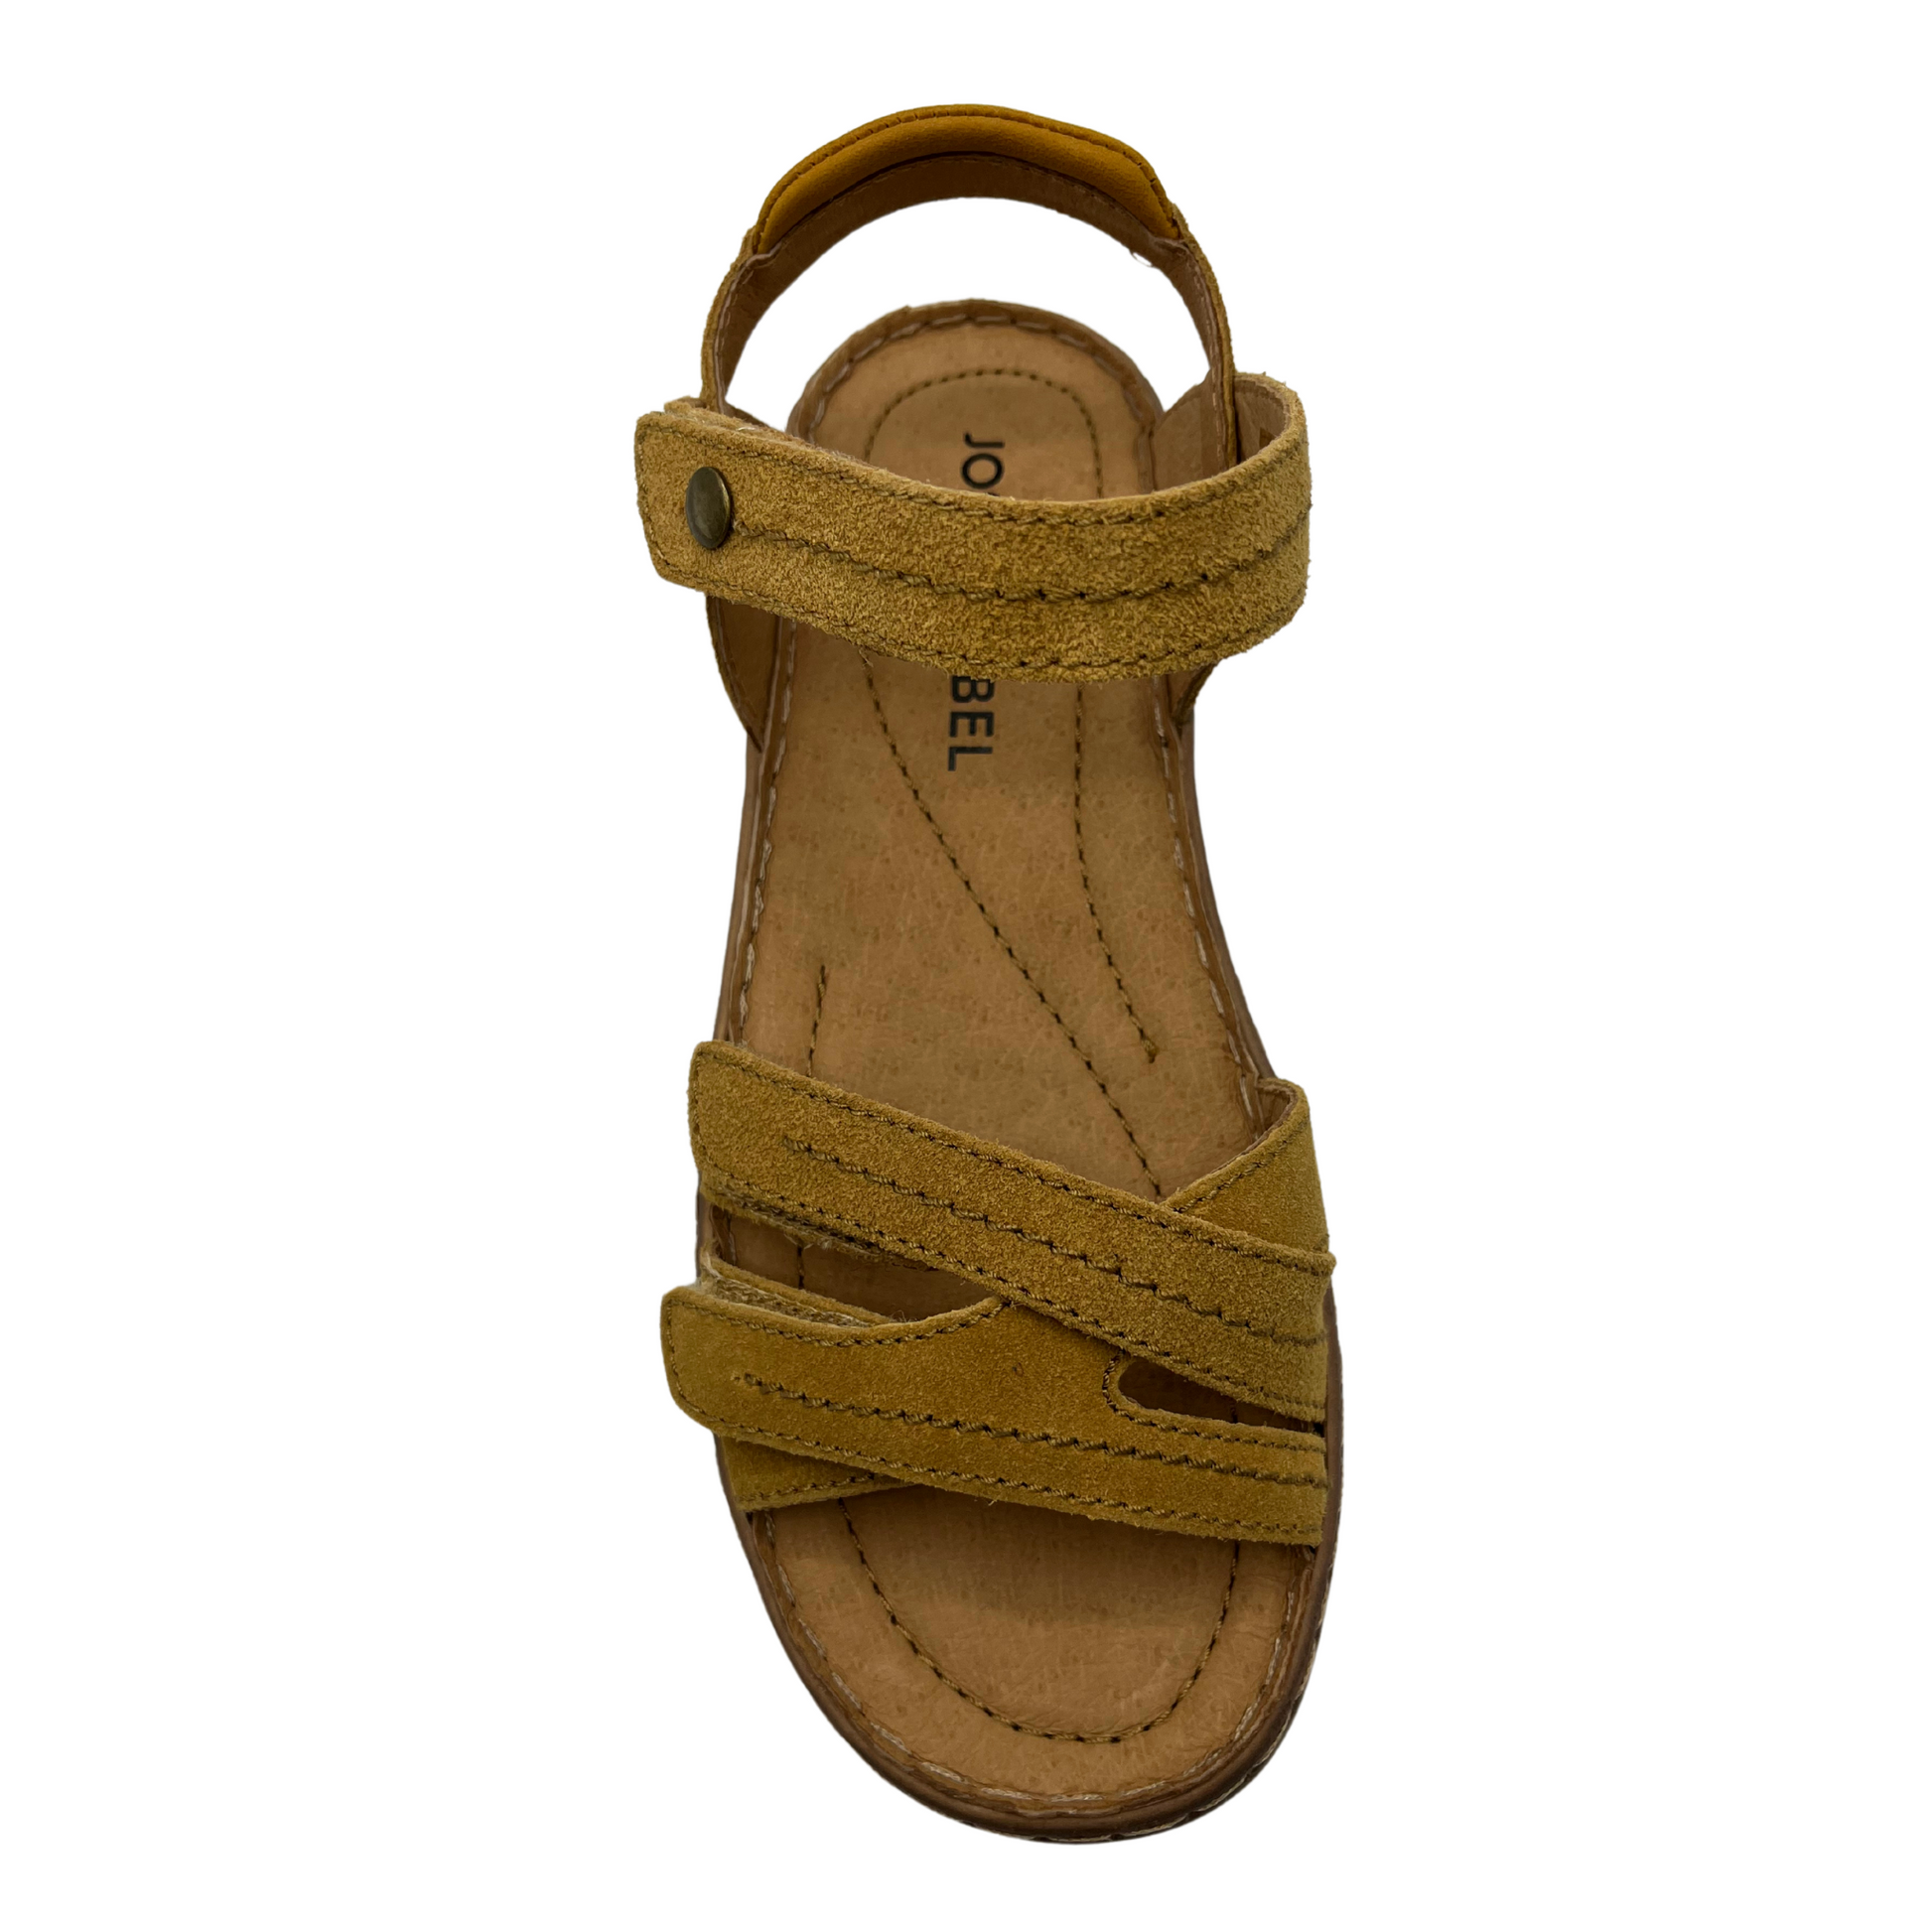 Top view of tan leather suede sandal with multiple adjustable straps and open toe